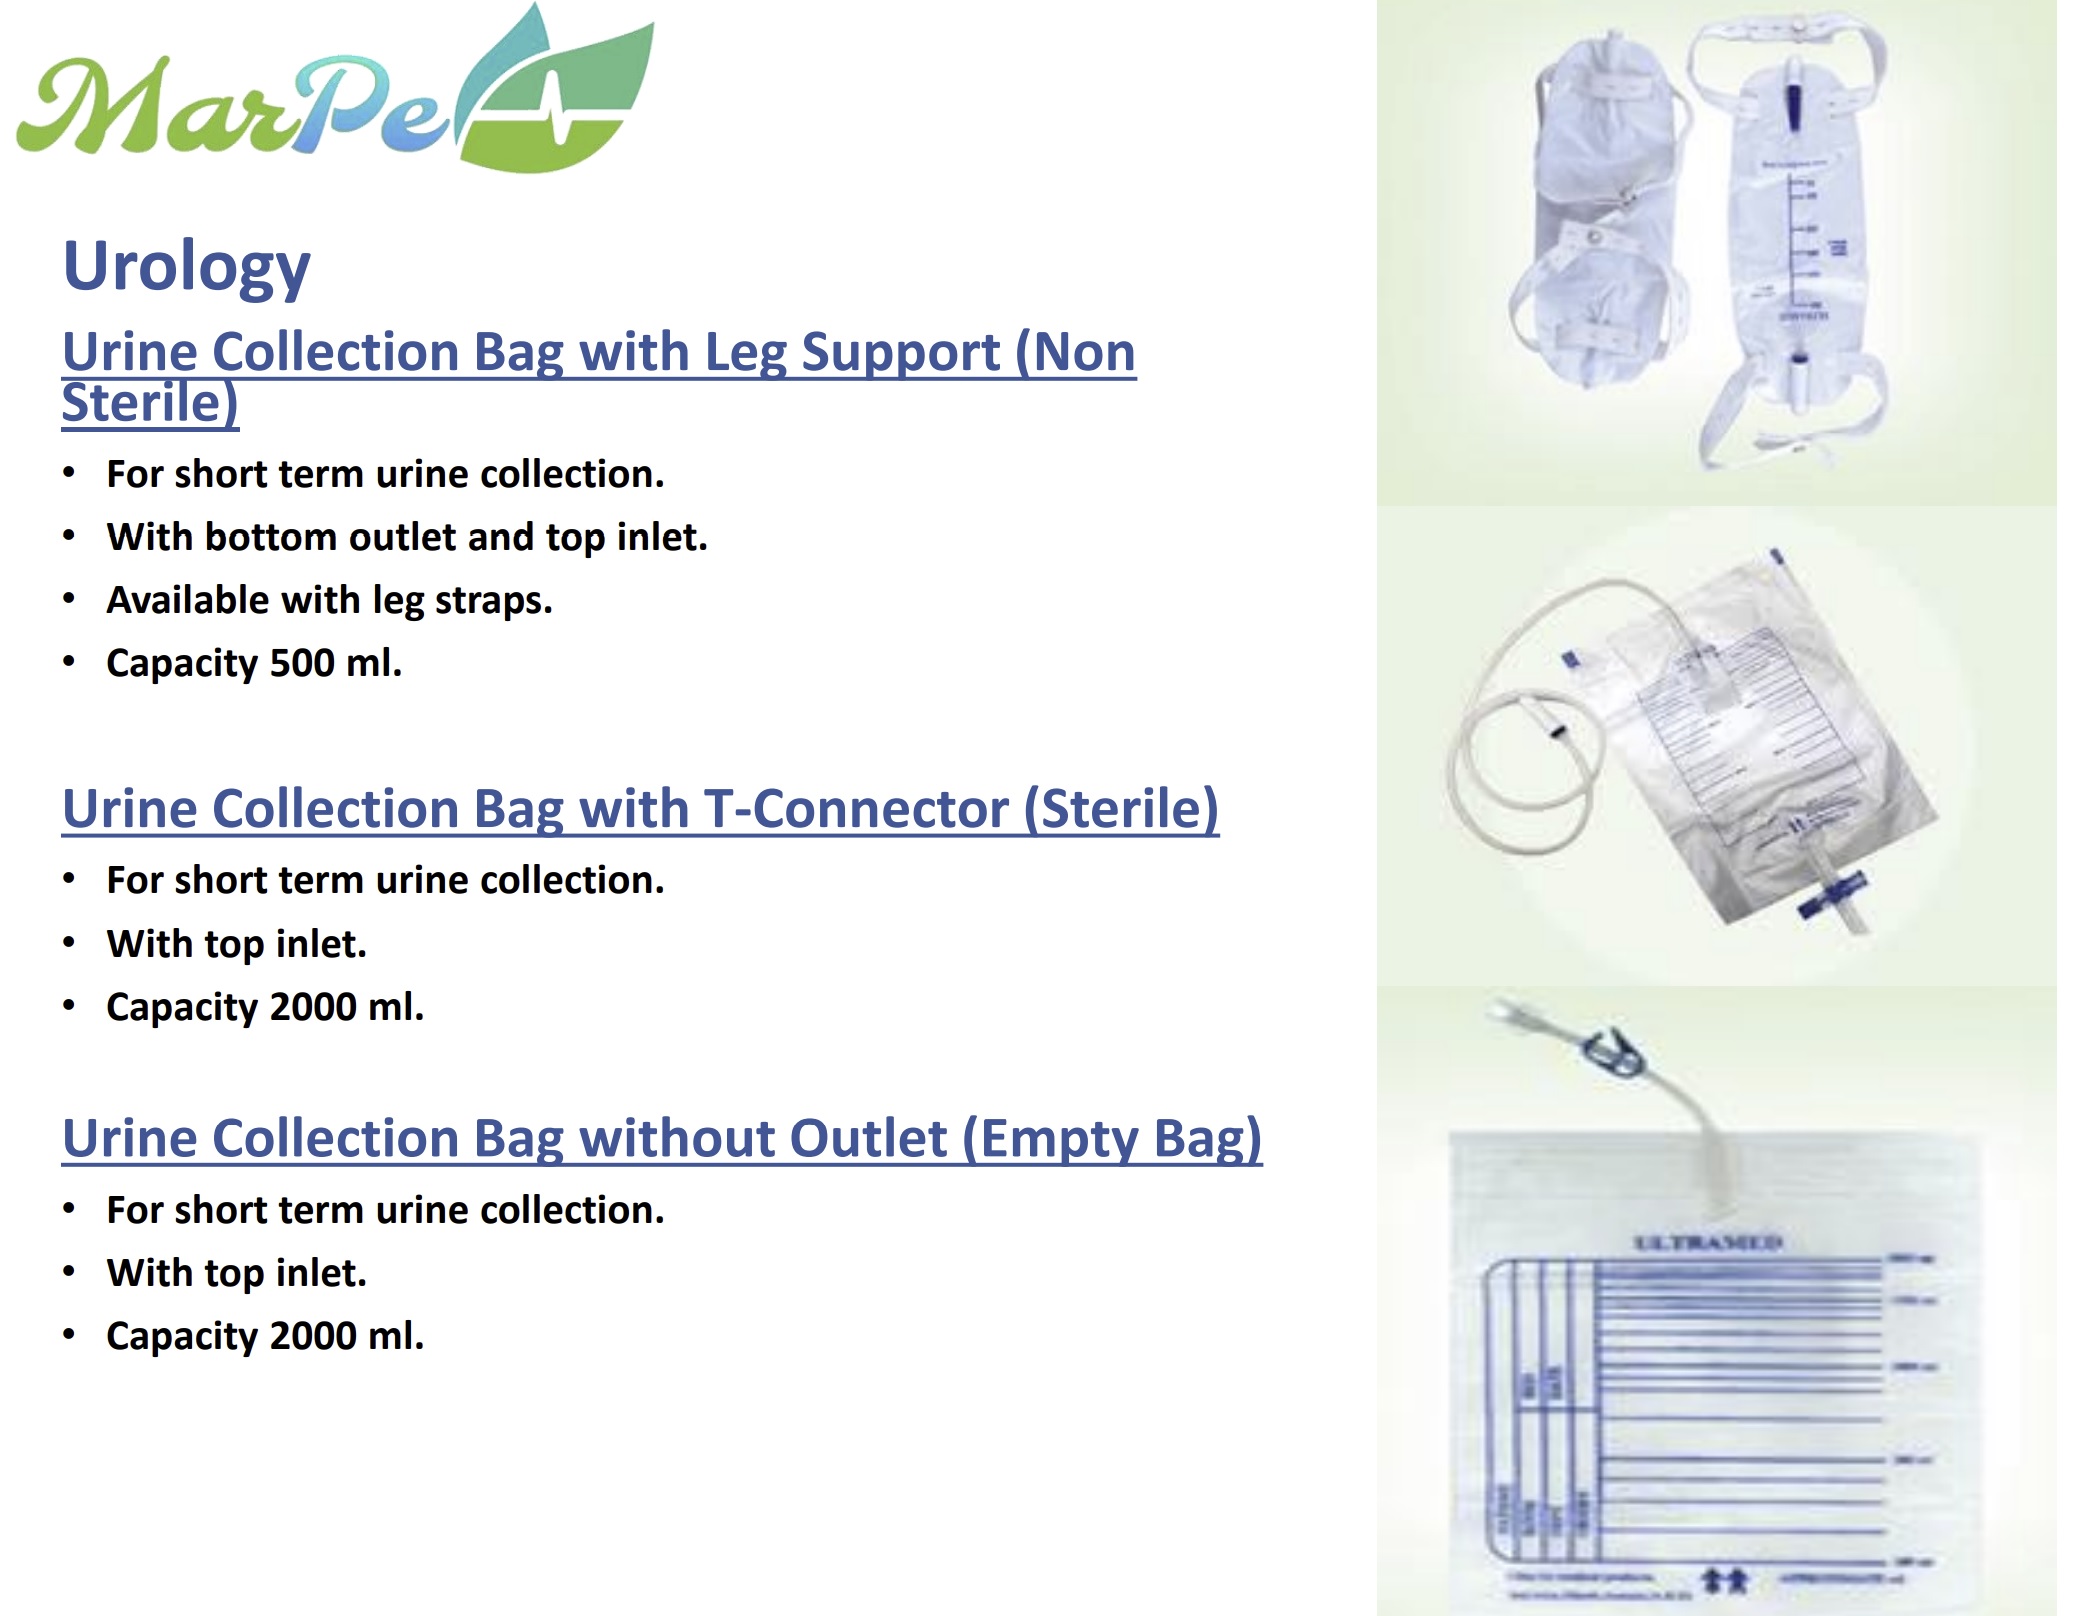 Urine Collection Bag Leg support & T-connector